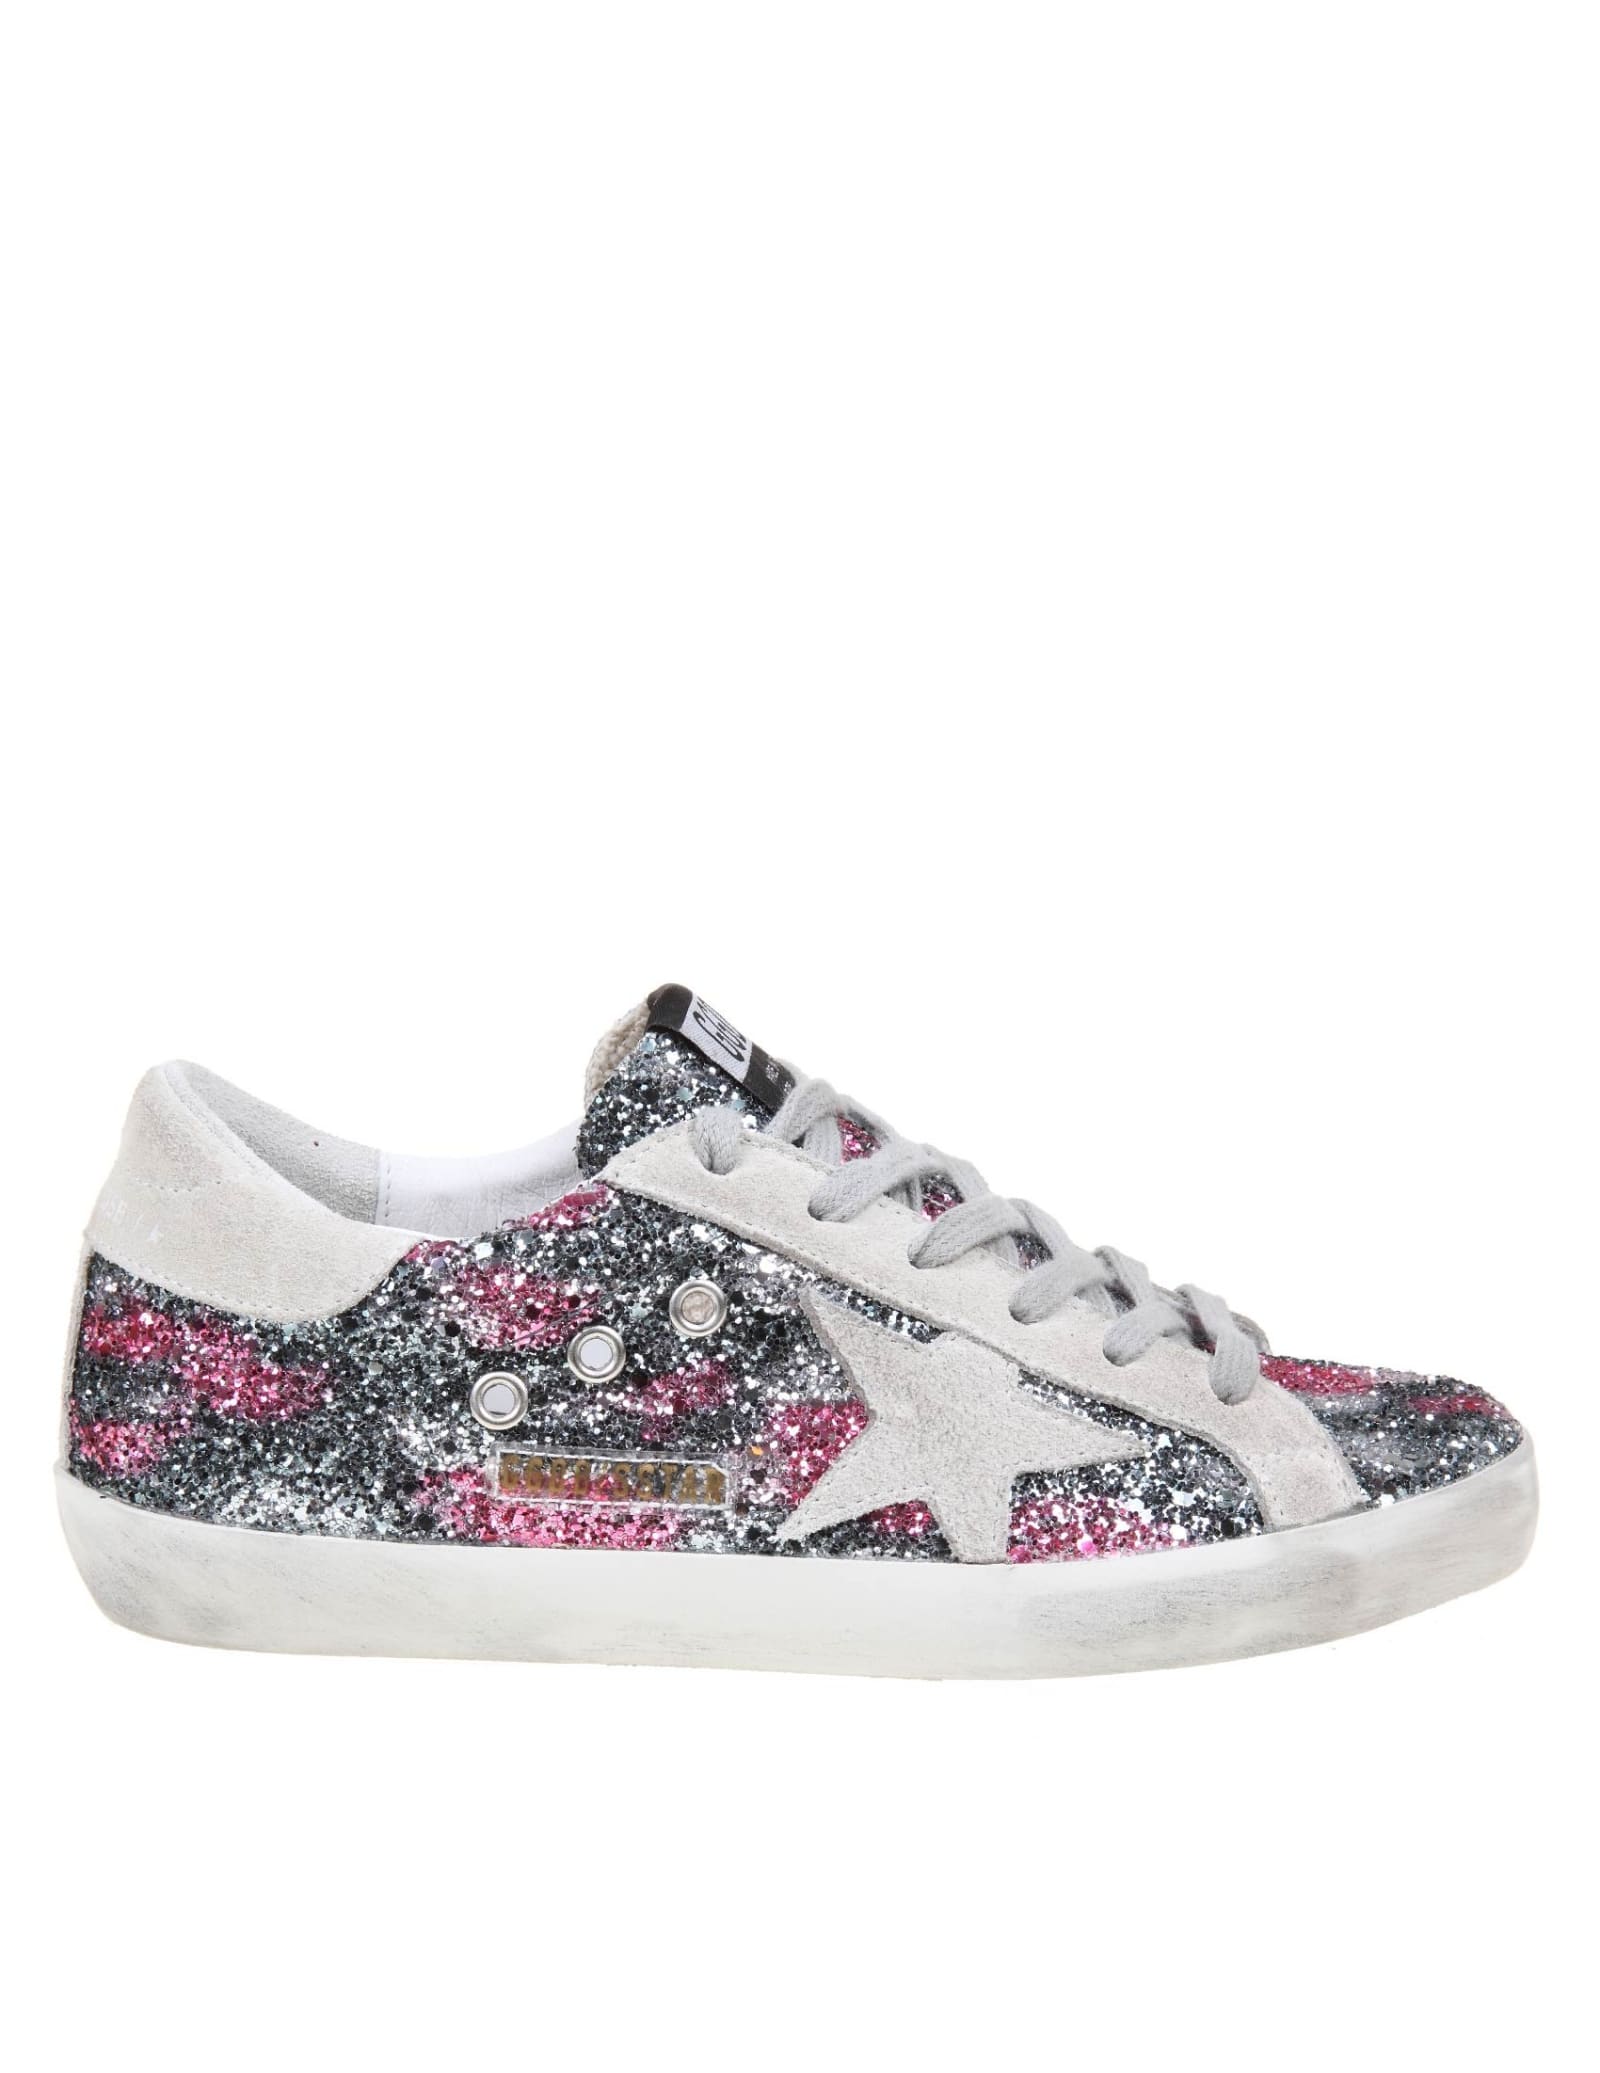 Buy Golden Goose Super Star Sneakers In Glitter Leopard online, shop Golden Goose shoes with free shipping